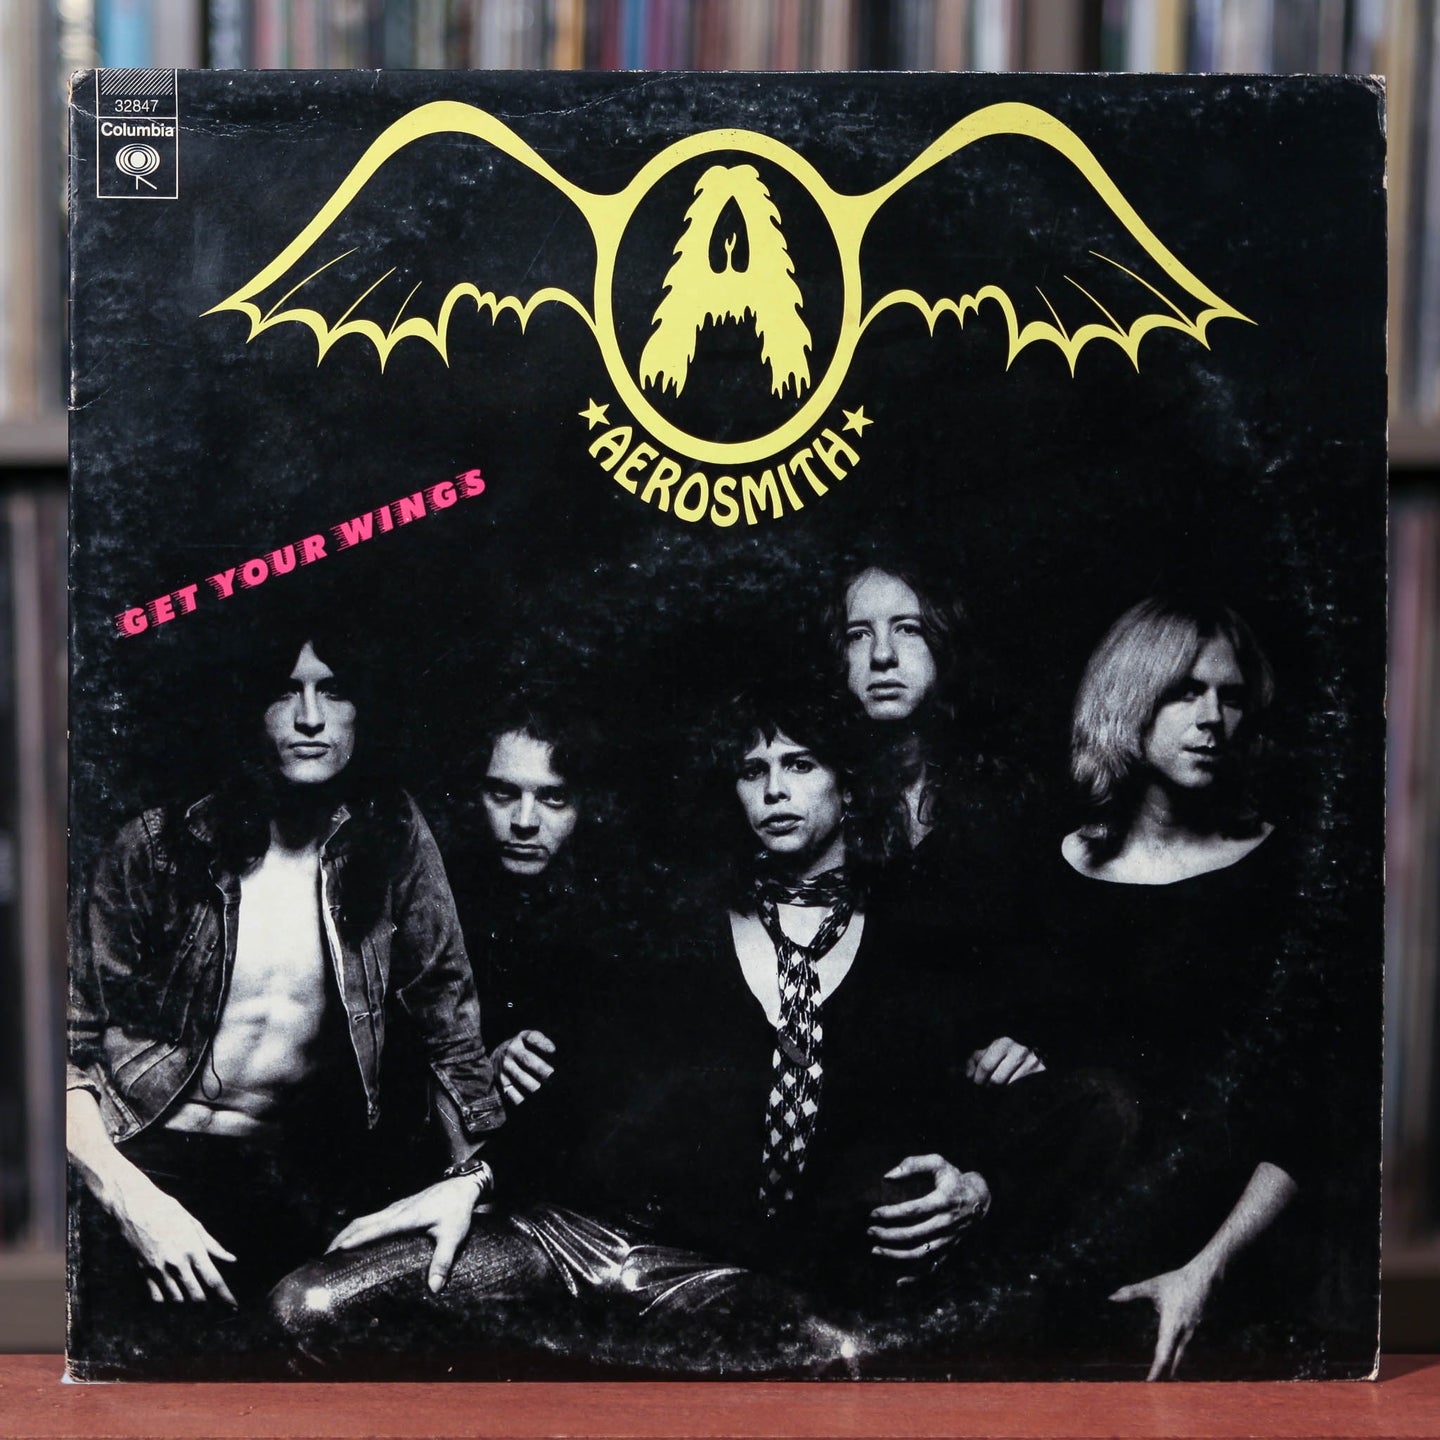 Aerosmith - Get Your Wings - 1974 Columbia, VG+/VG